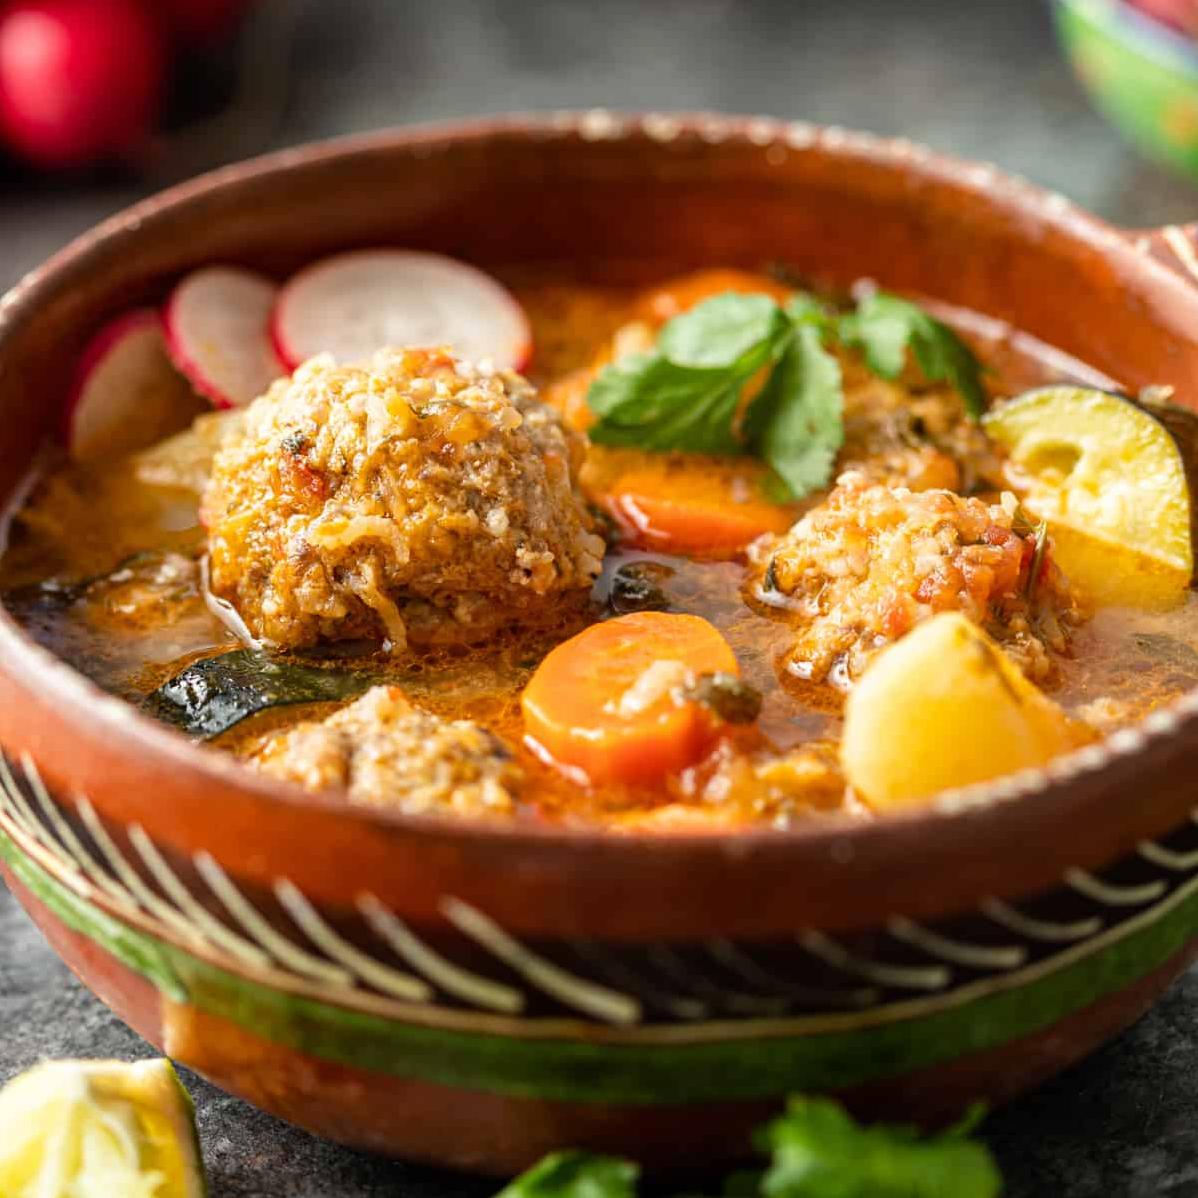   Meatballs cooked to perfection in a flavorful broth!